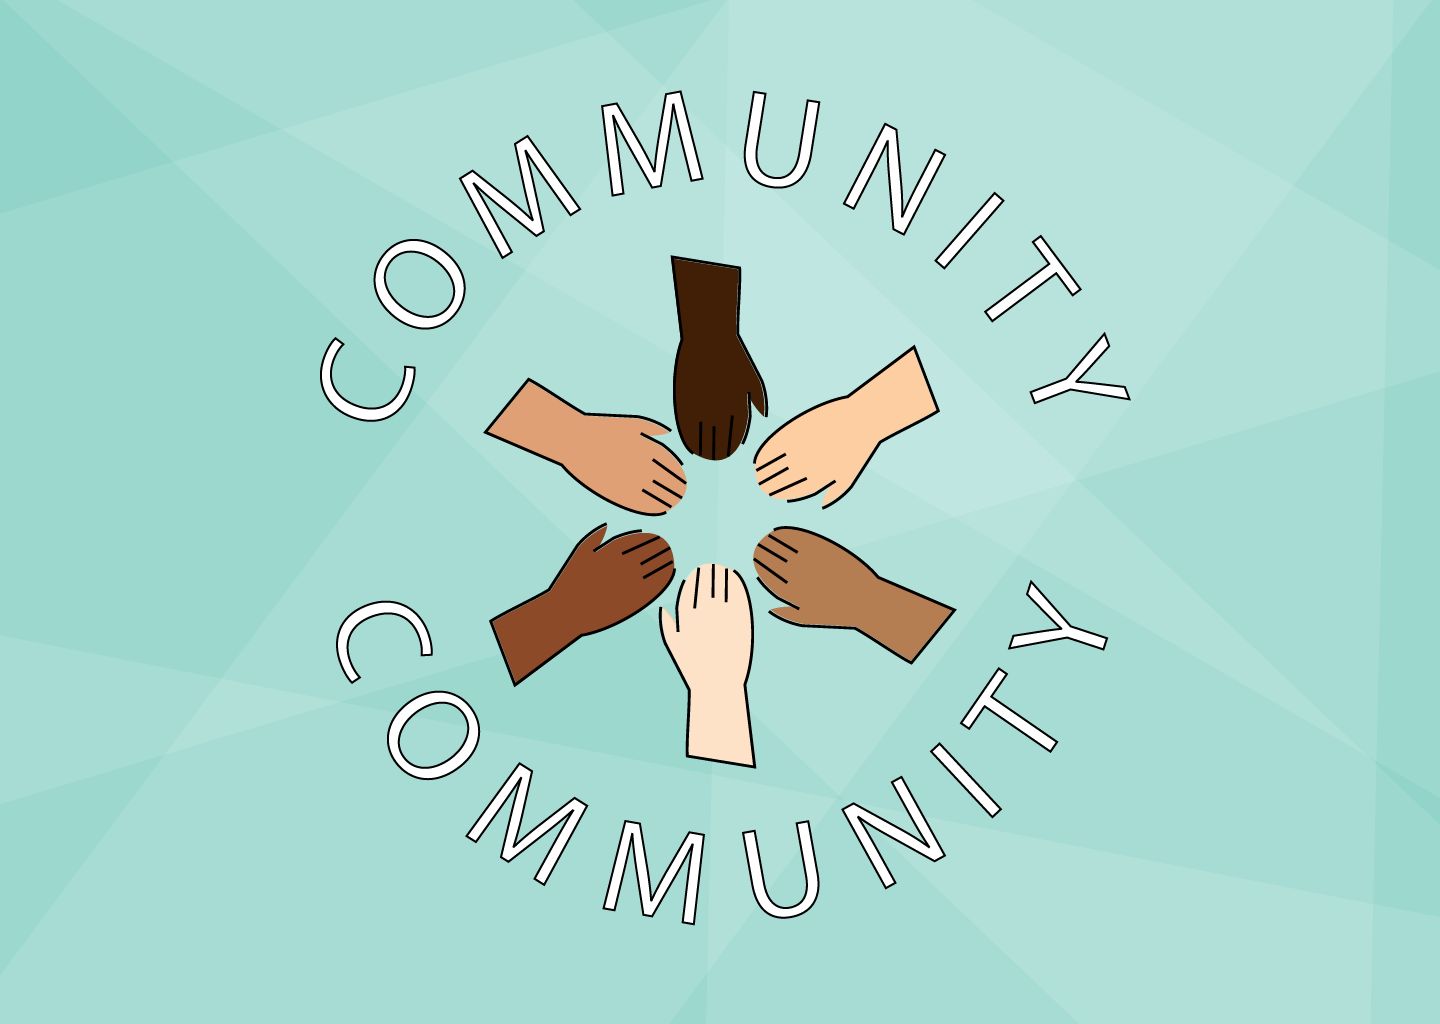 7 Community Outreach Ideas for Nonprofits in 2021